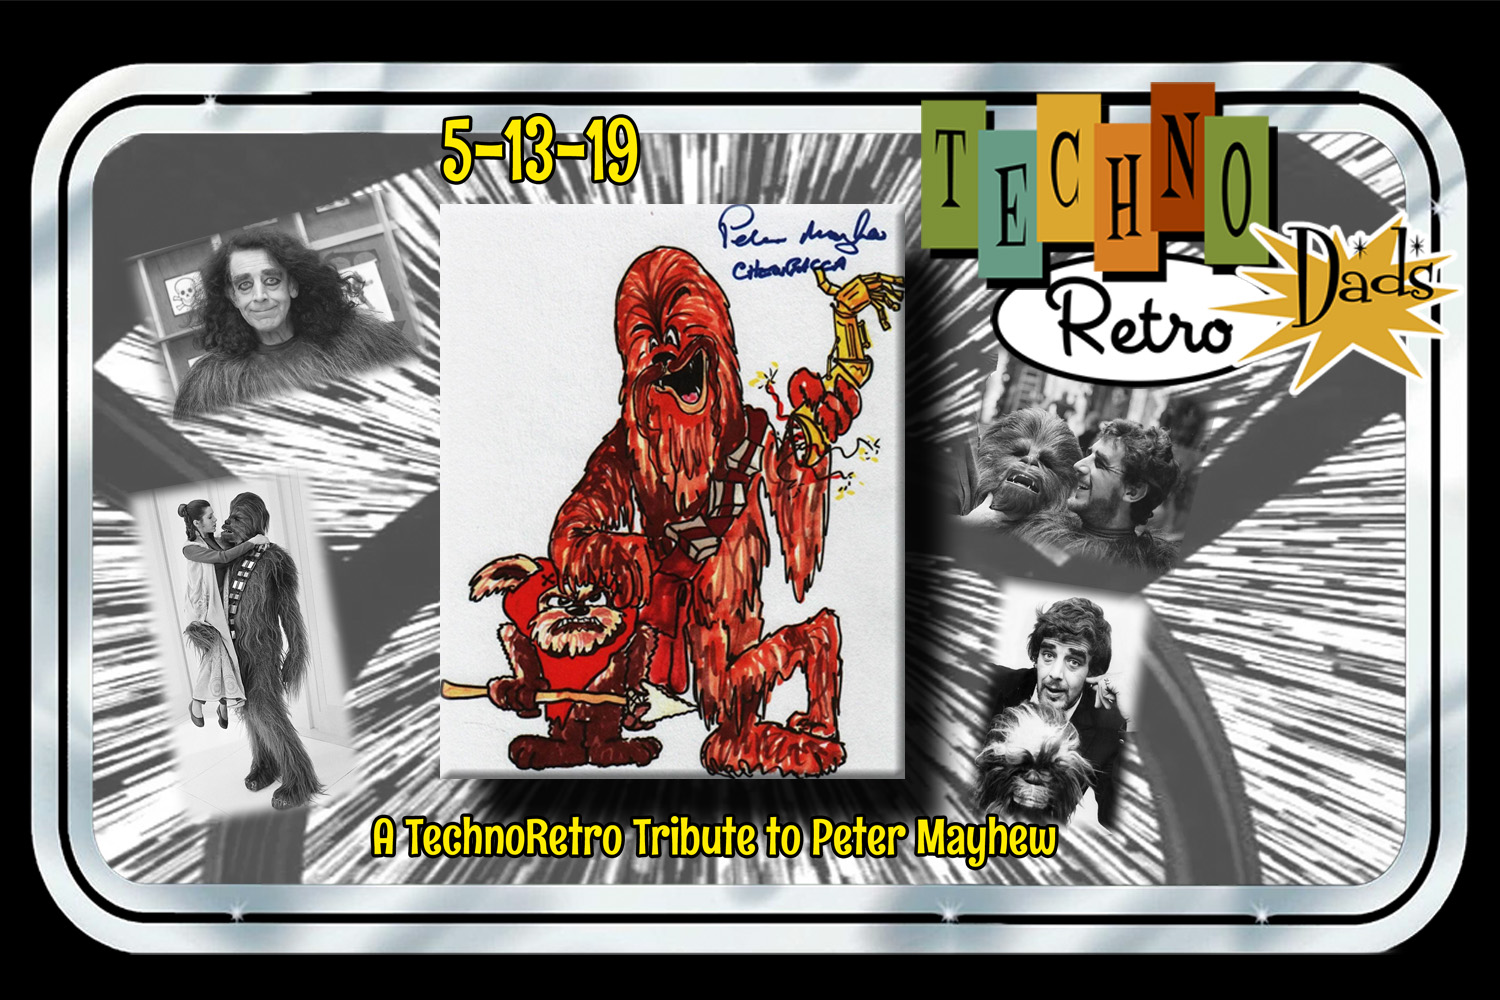 TechnoRetro Dads: What a Wookiee! Peter Mayhew Is Chewbacca